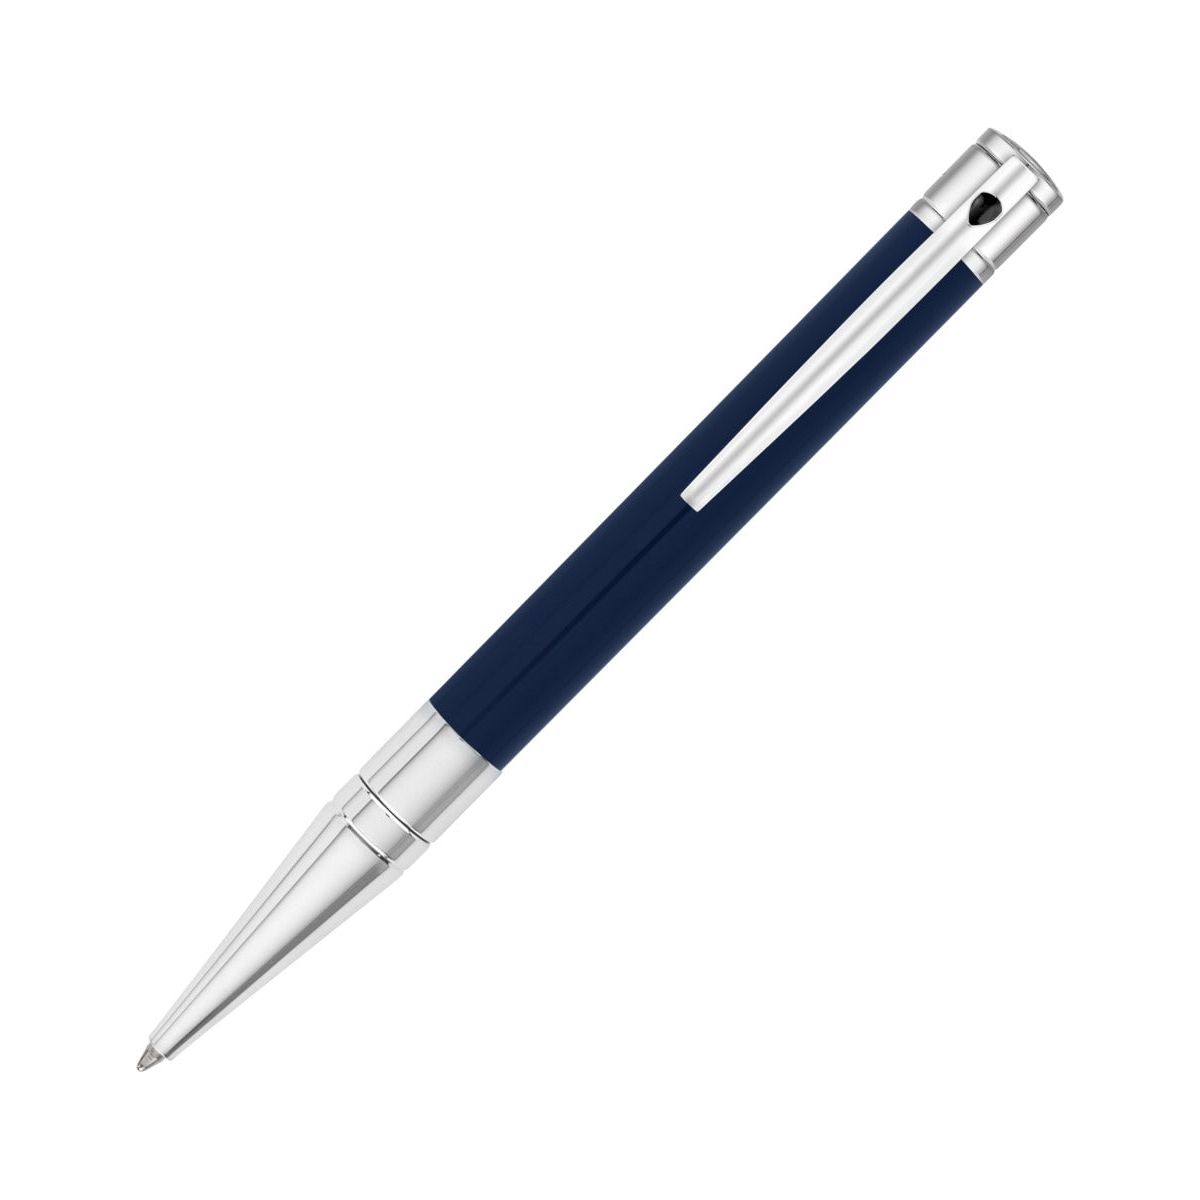 DUPONT WRITING PENNE S-T- DUPONT MOD. 265205 penne-s-t-dupont-mod-265205 FASHION ACCESSORIES 265205.jpg